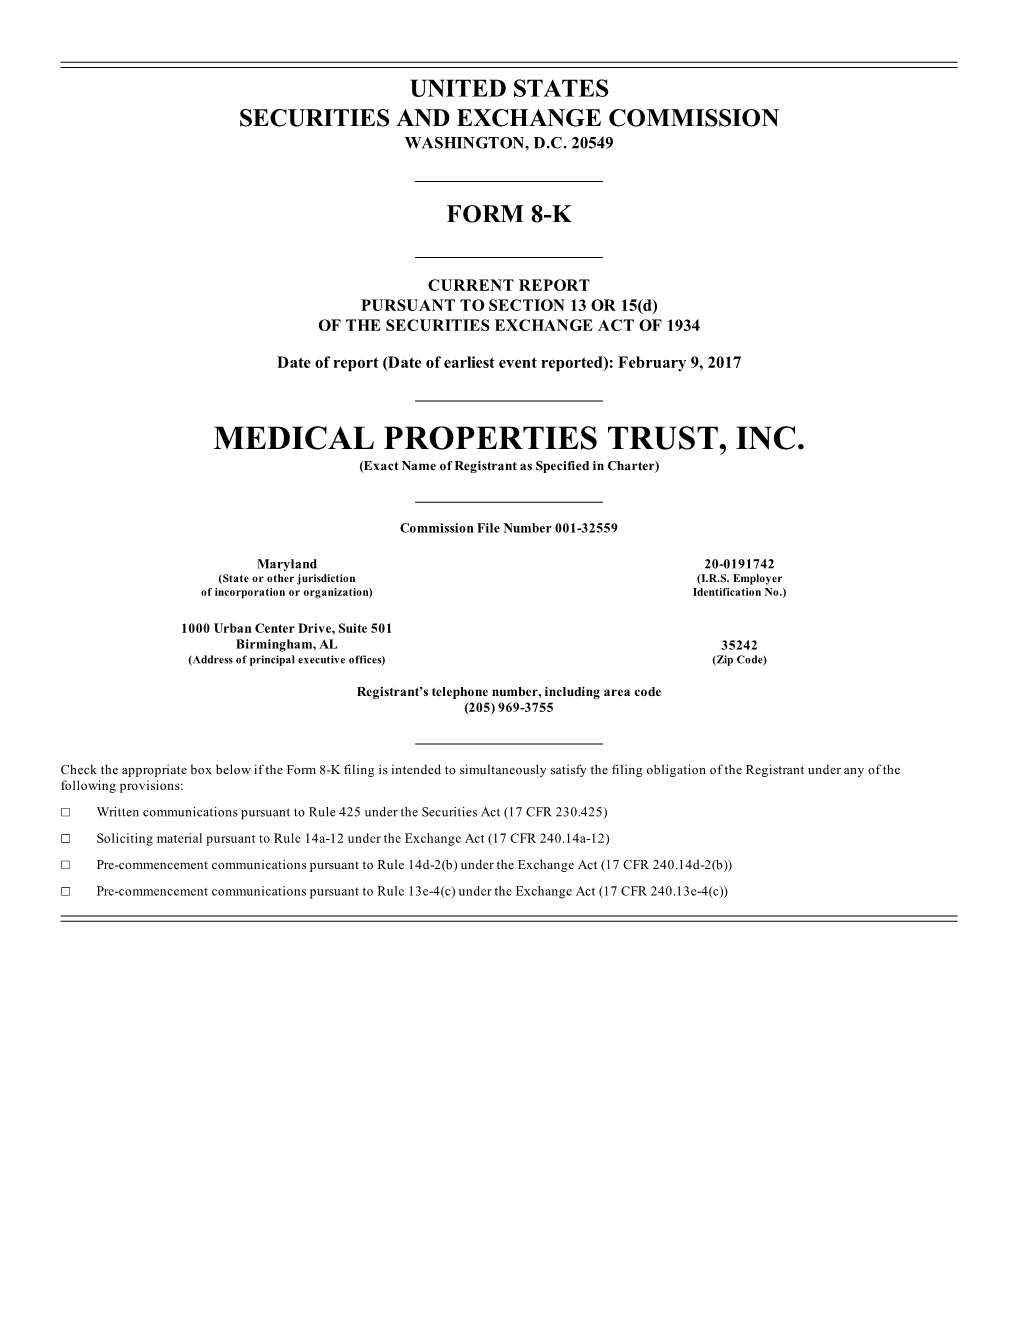 MEDICAL PROPERTIES TRUST, INC. (Exact Name of Registrant As Specified in Charter)